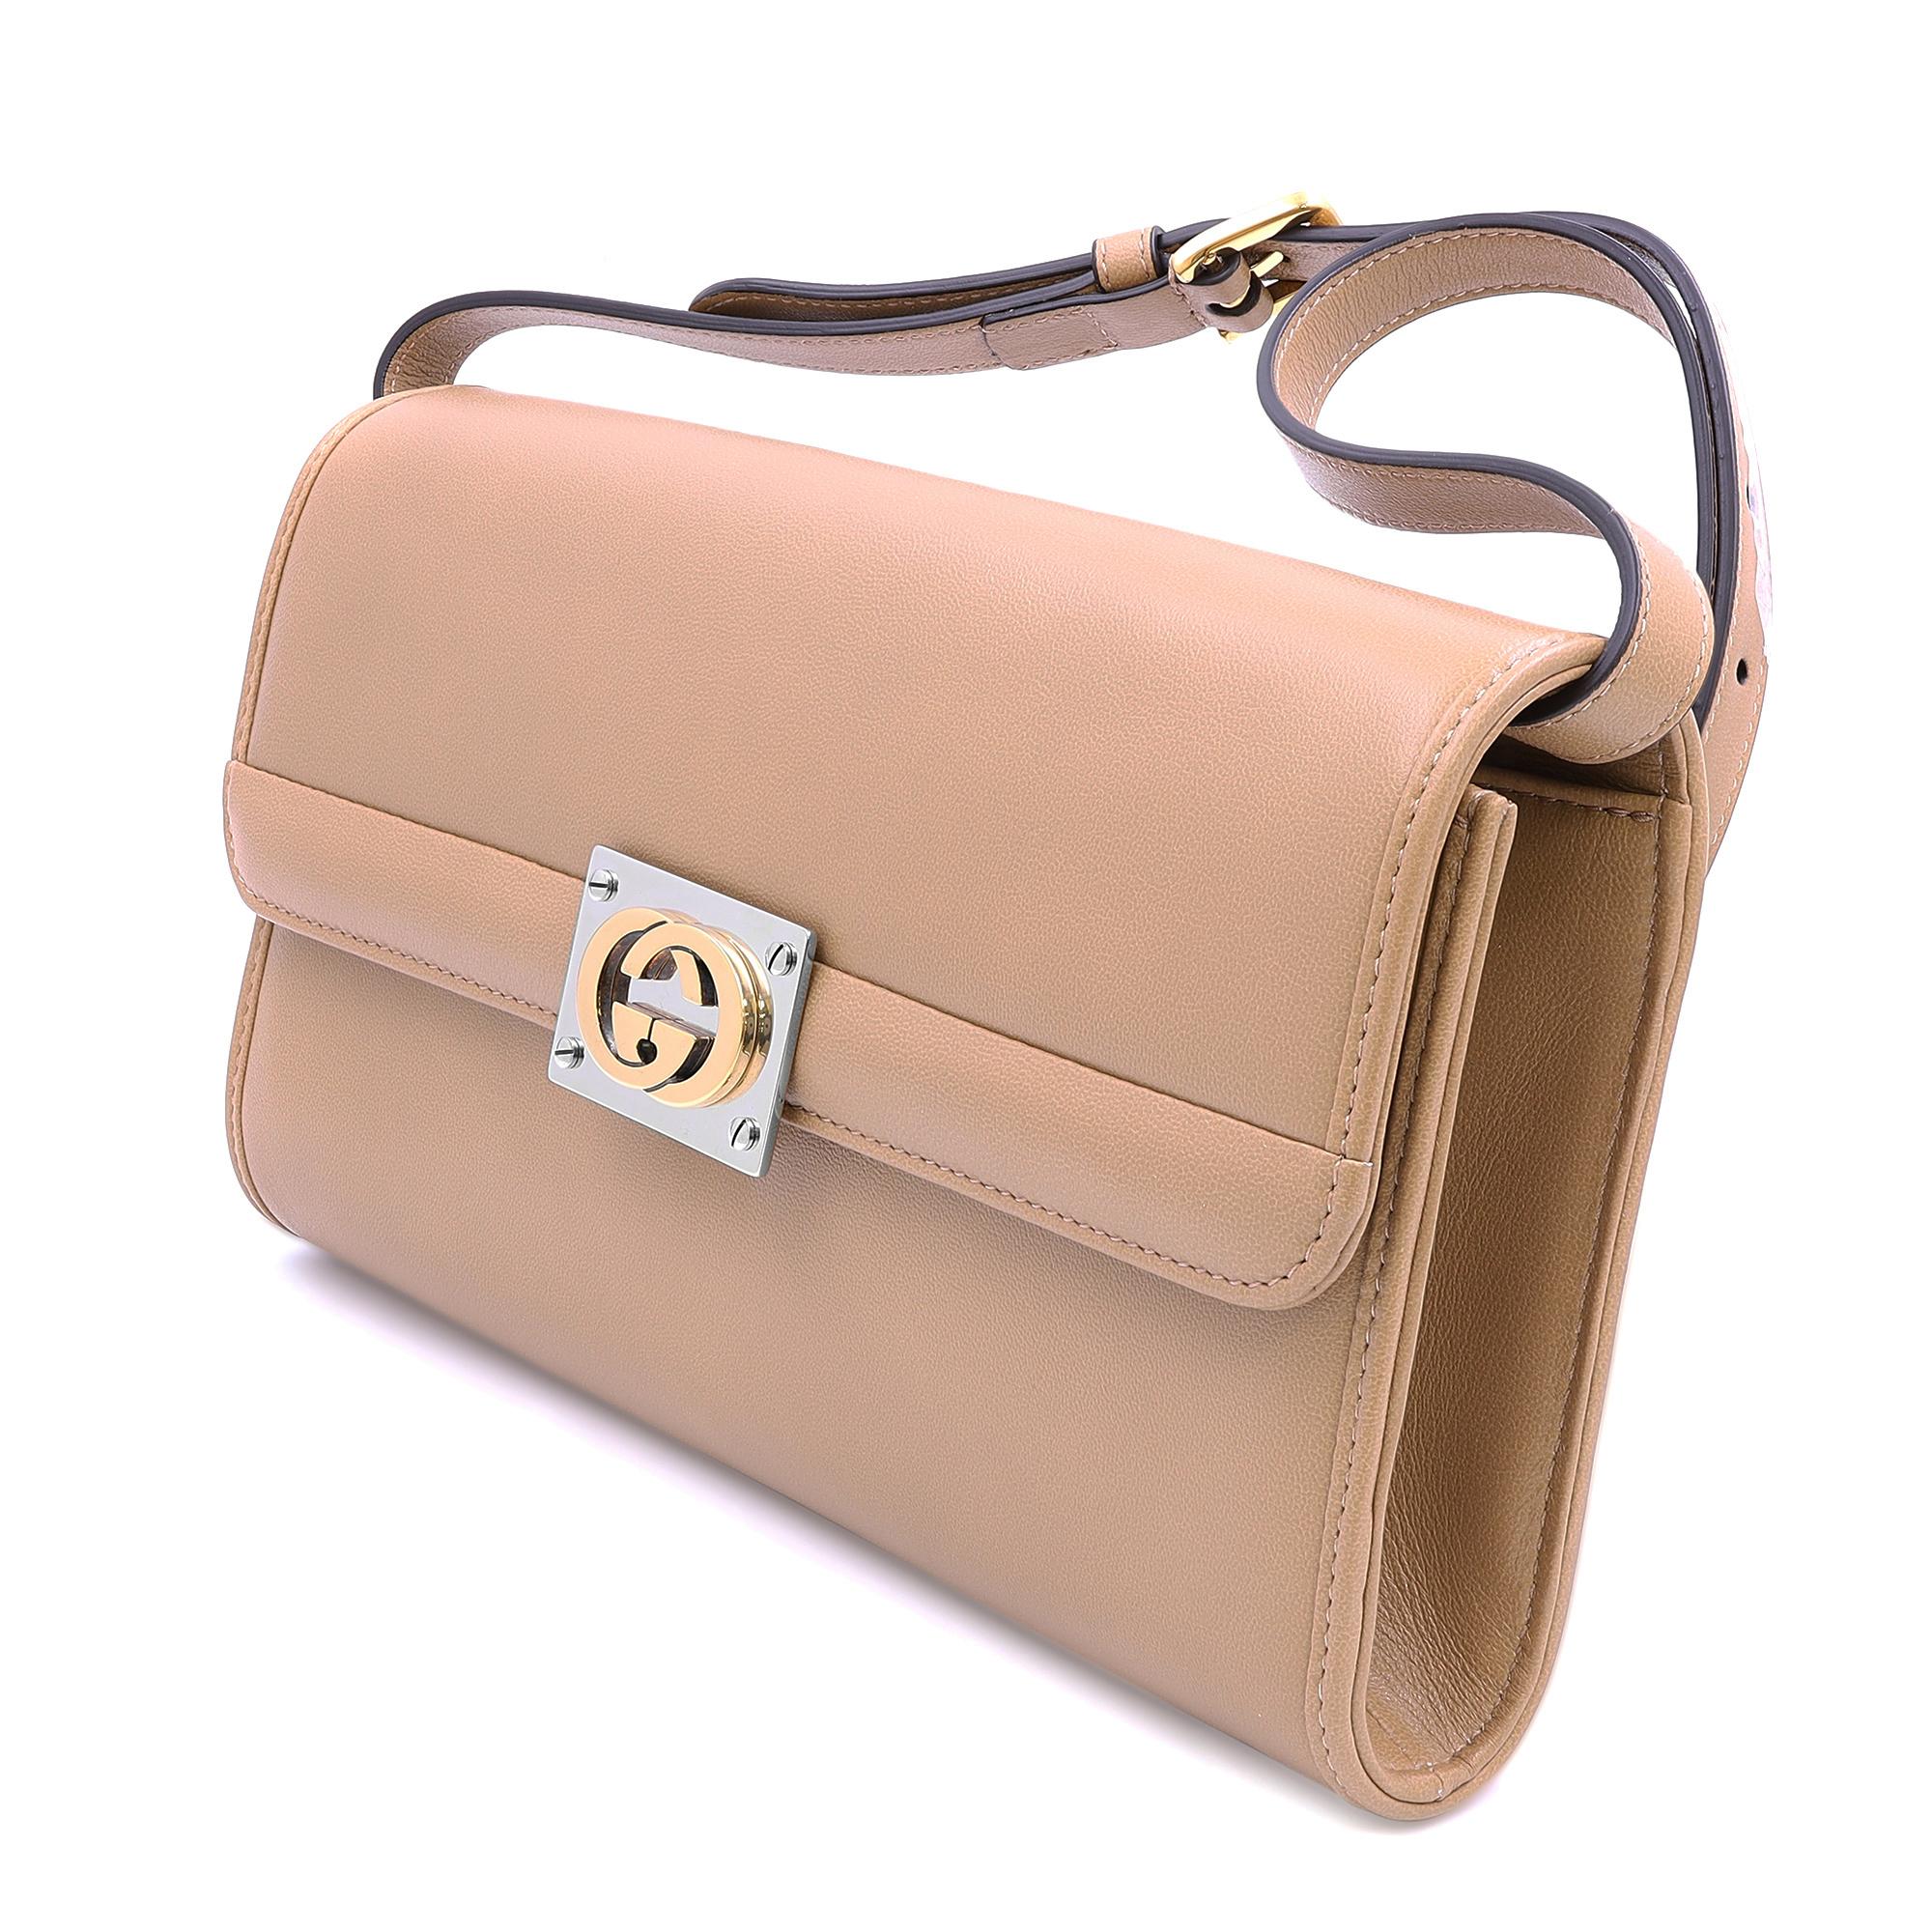 Gucci Matisse beige leather clutch/shoulder bag. It features a polished multicolor interlocking Gucci GG logo hardware on the front with a removable and adjustable beige leather shoulder strap with gold tone pin-buckle fastening. Turn lock closure